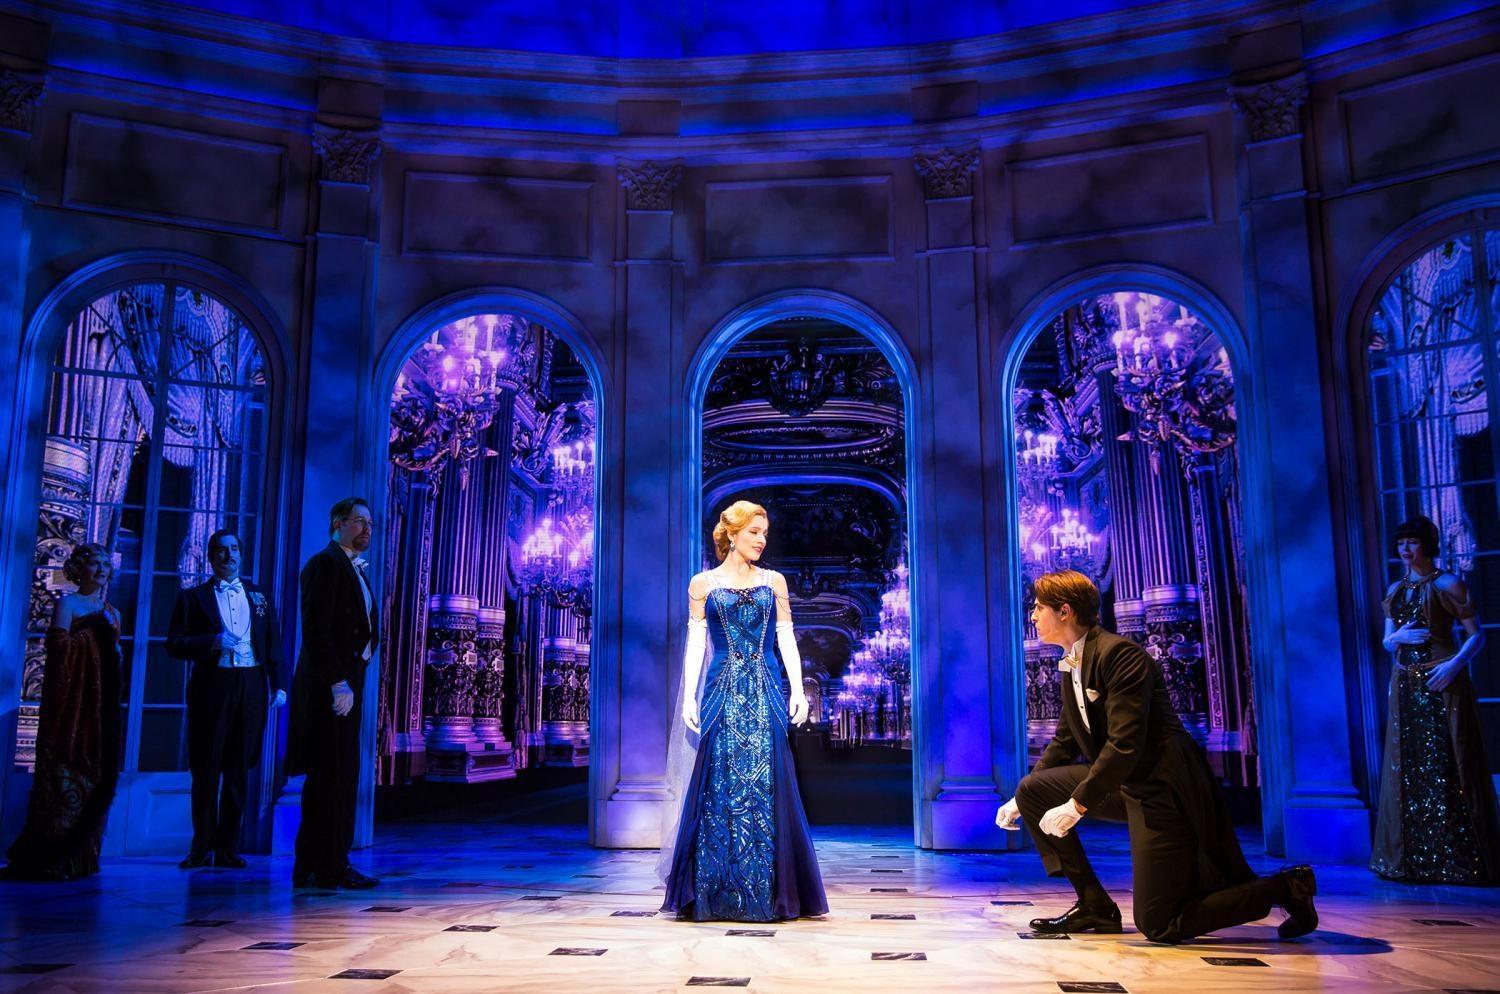 Christy Altomare as the 18-year-old orphan Anya and Derek Klena as con-man Dmitry star in the musical adaptation of “Anastasia.” “Anastasia” is running at the Broadhurst Theatre.